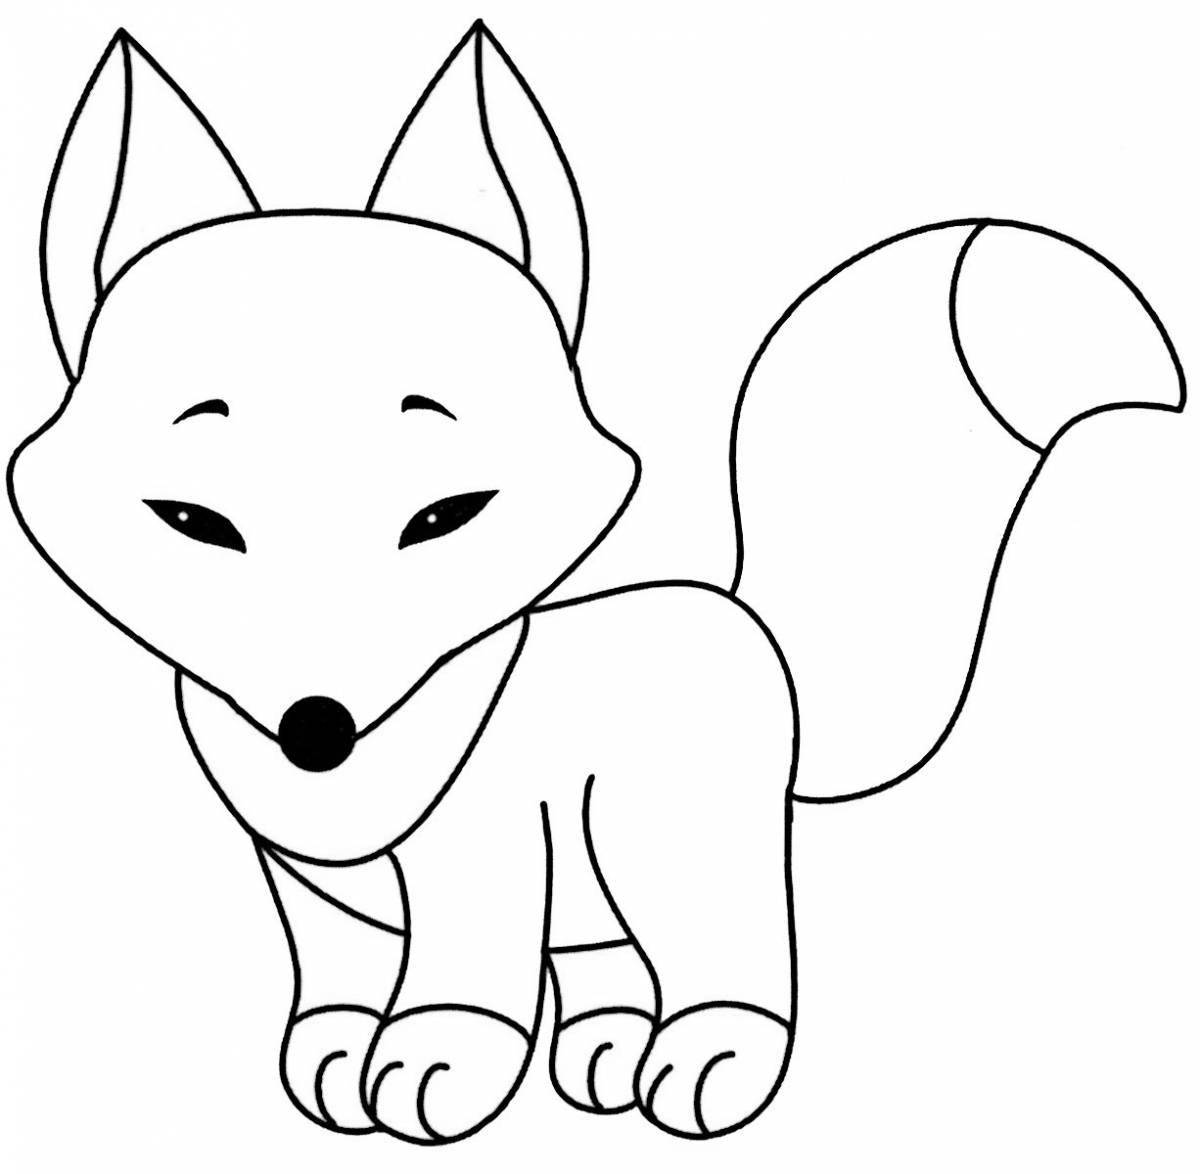 Cute fox coloring book for 2-3 year olds